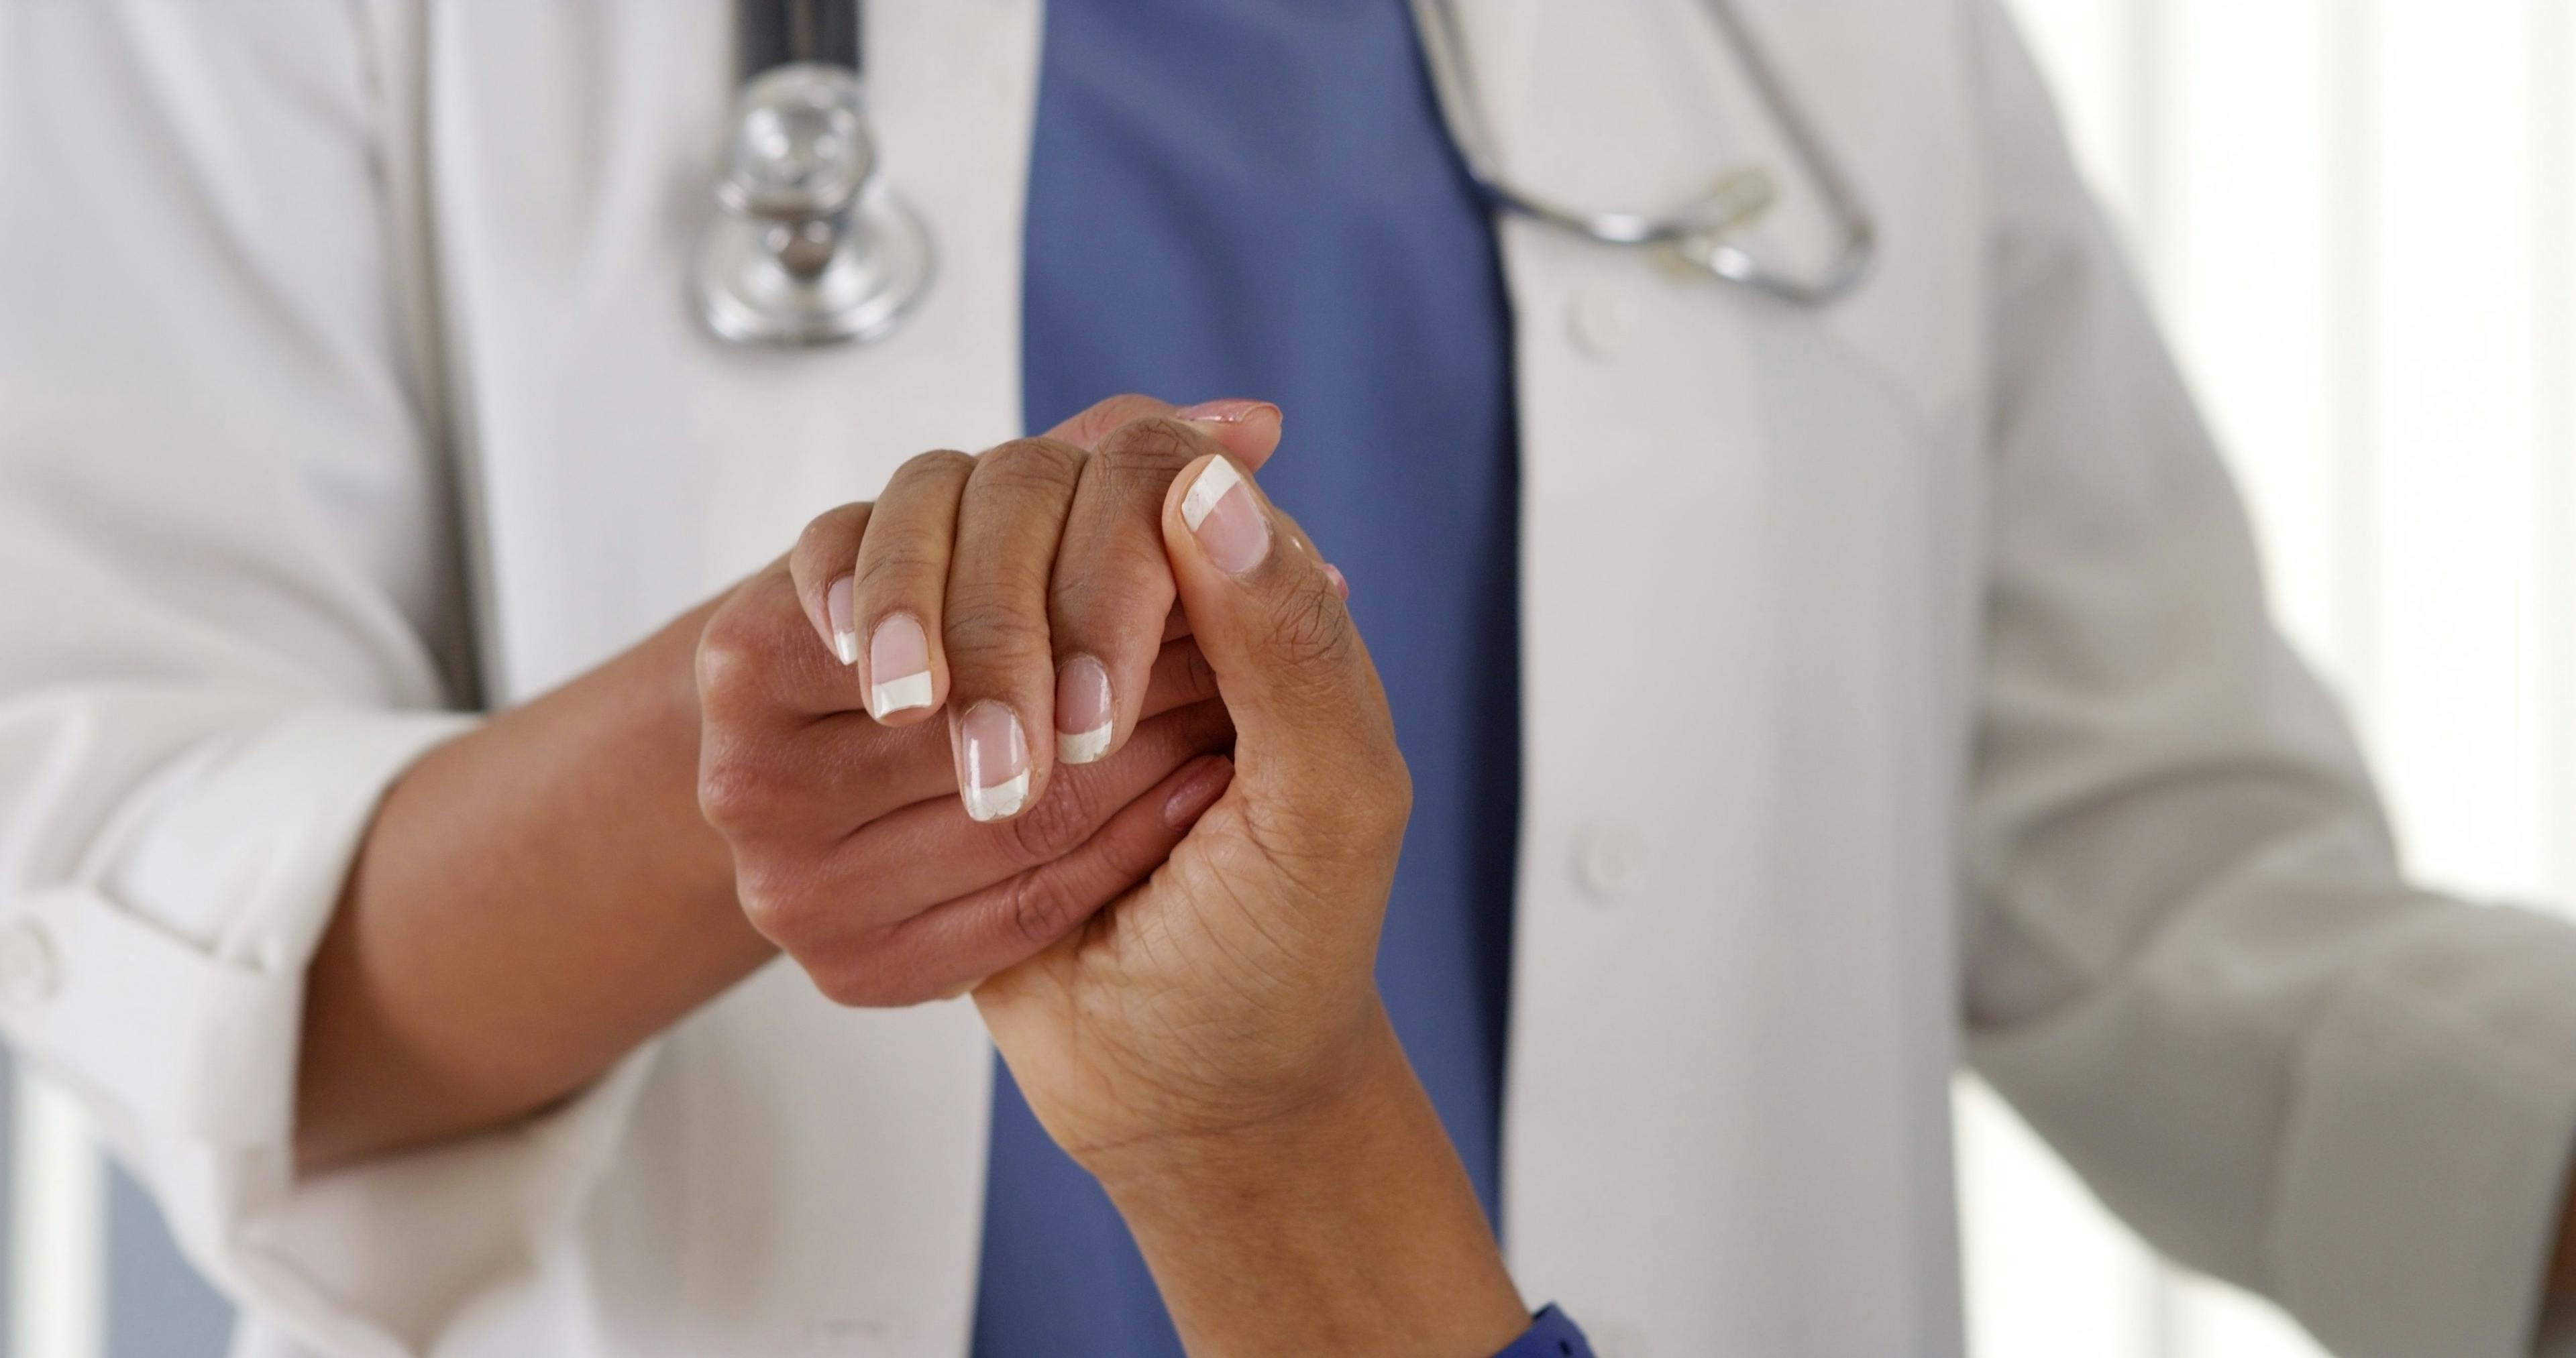 A doctor wearing a white coat reaches his hand inside